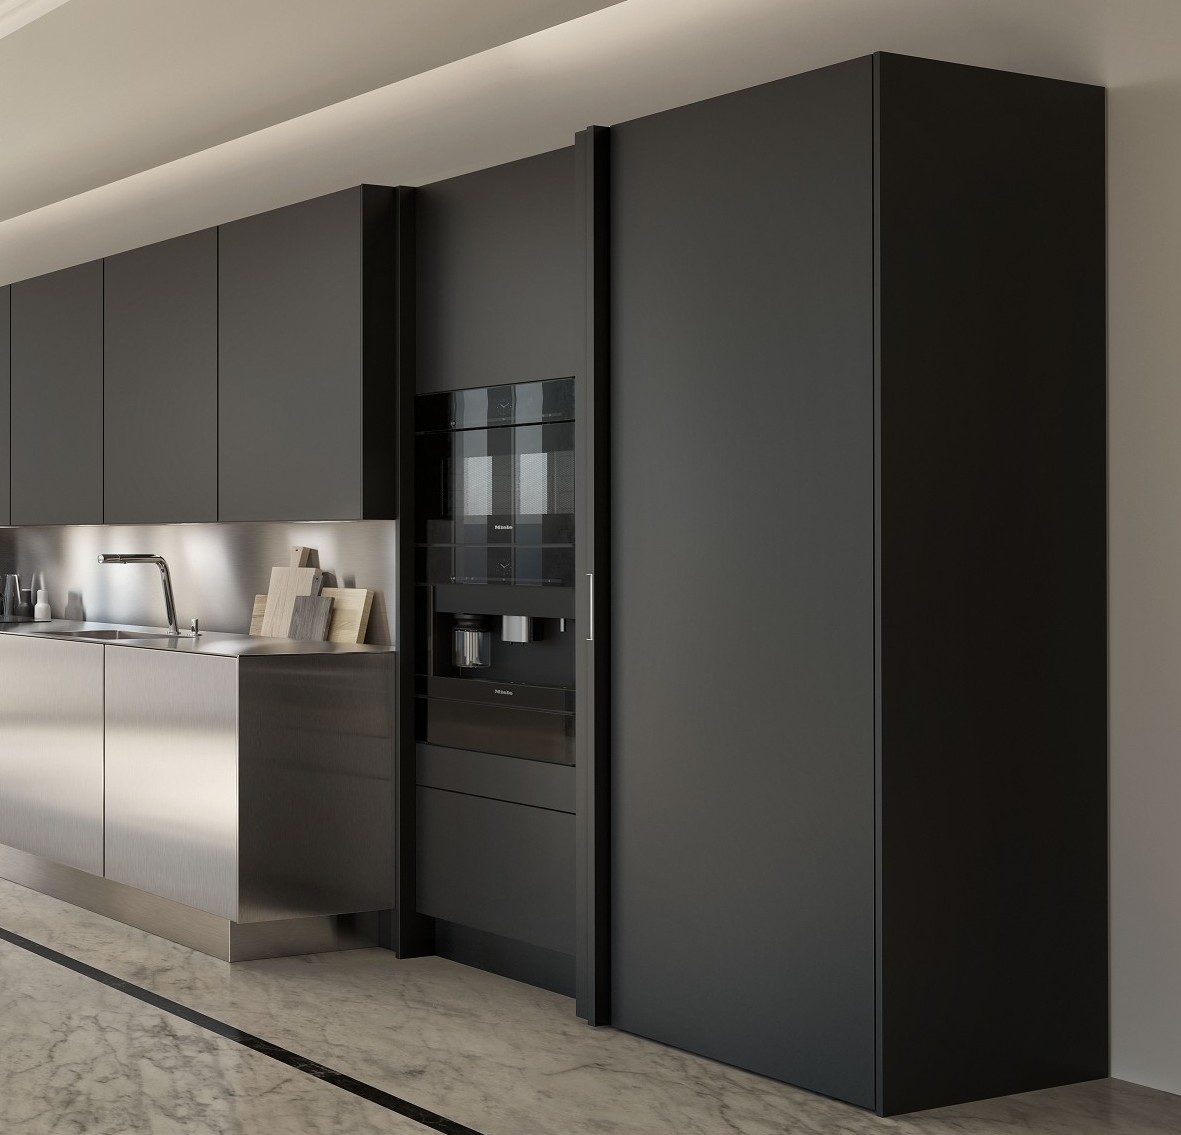 Kitchen appliances can hide behind retractable pocket doors by SieMatic.